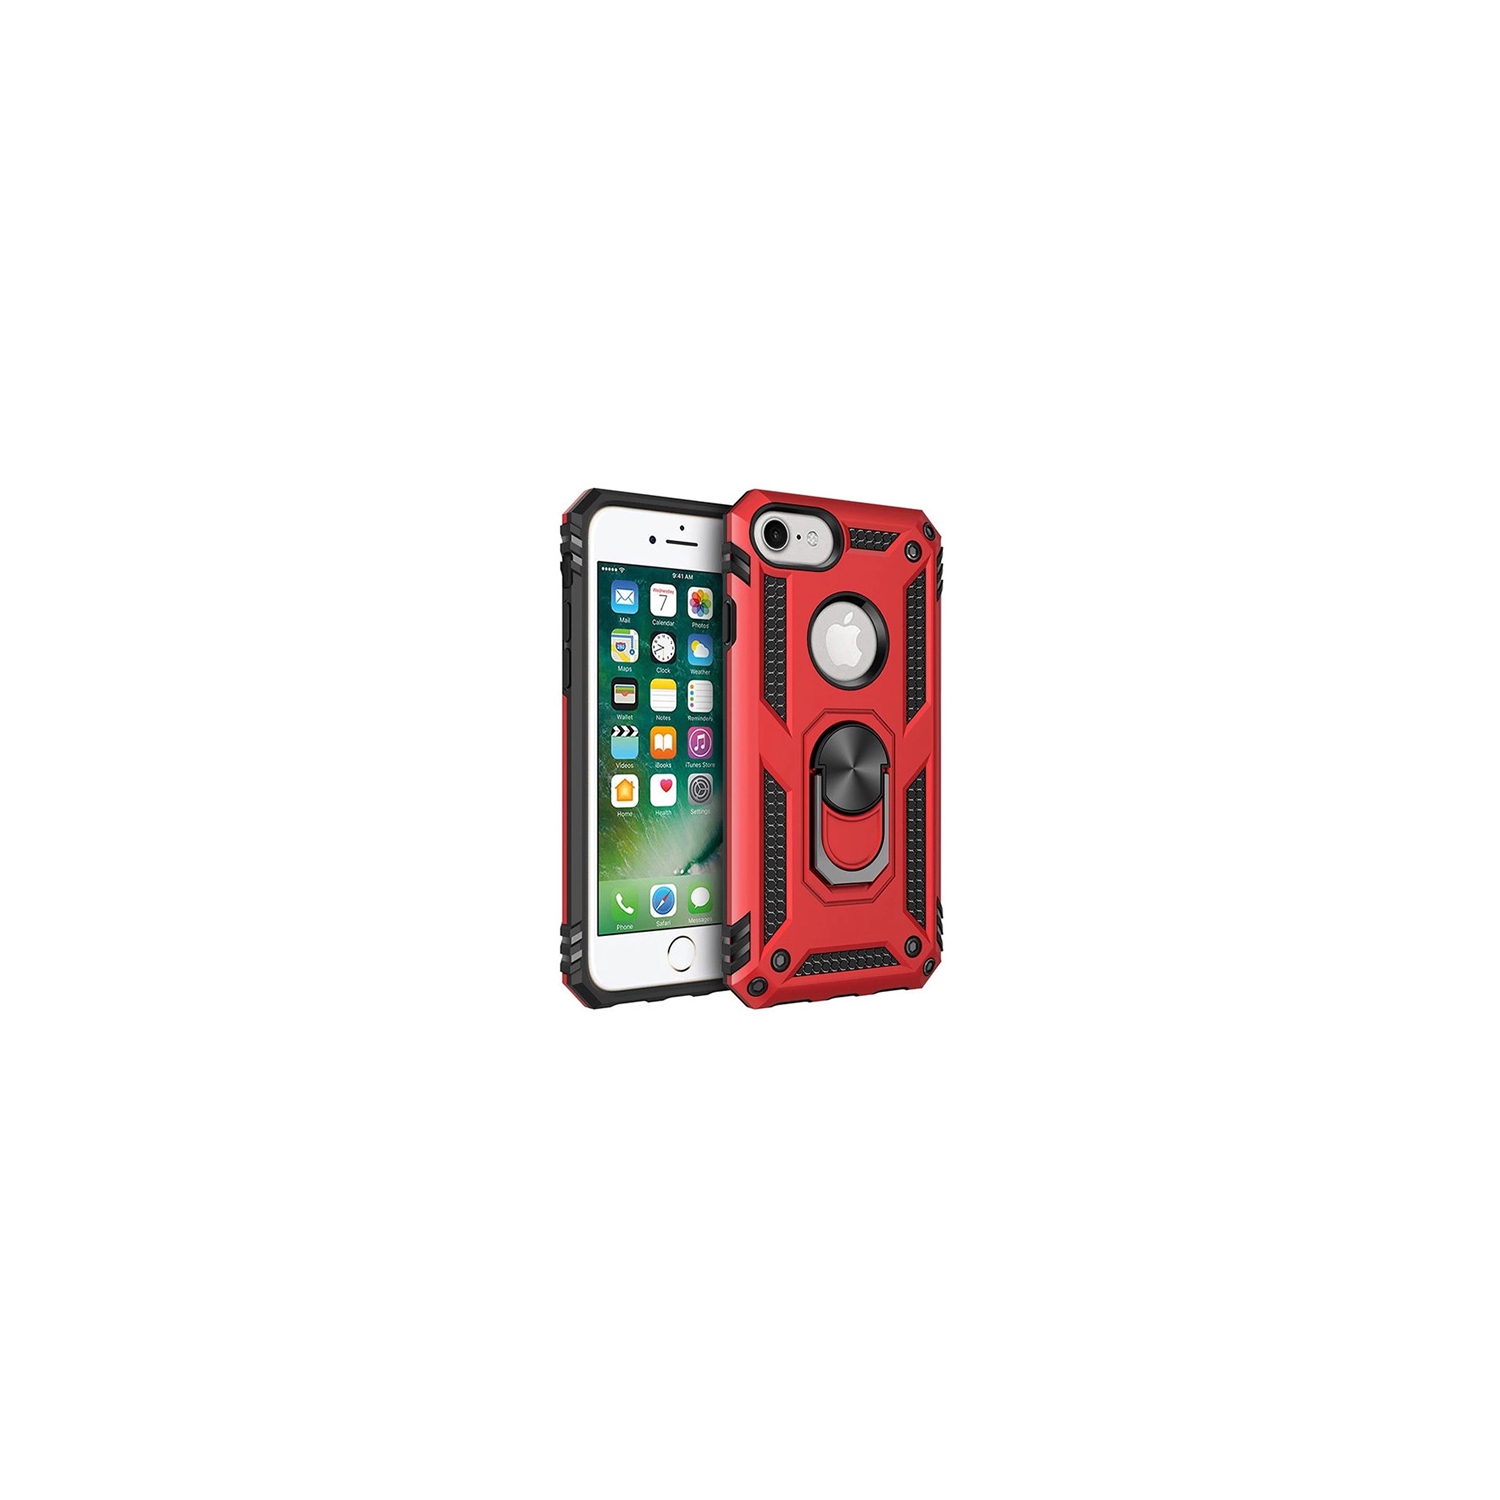 【CSmart】 Anti-Drop Hybrid Magnetic Hard Armor Case with Ring Holder for iPhone 7 / 8, Red